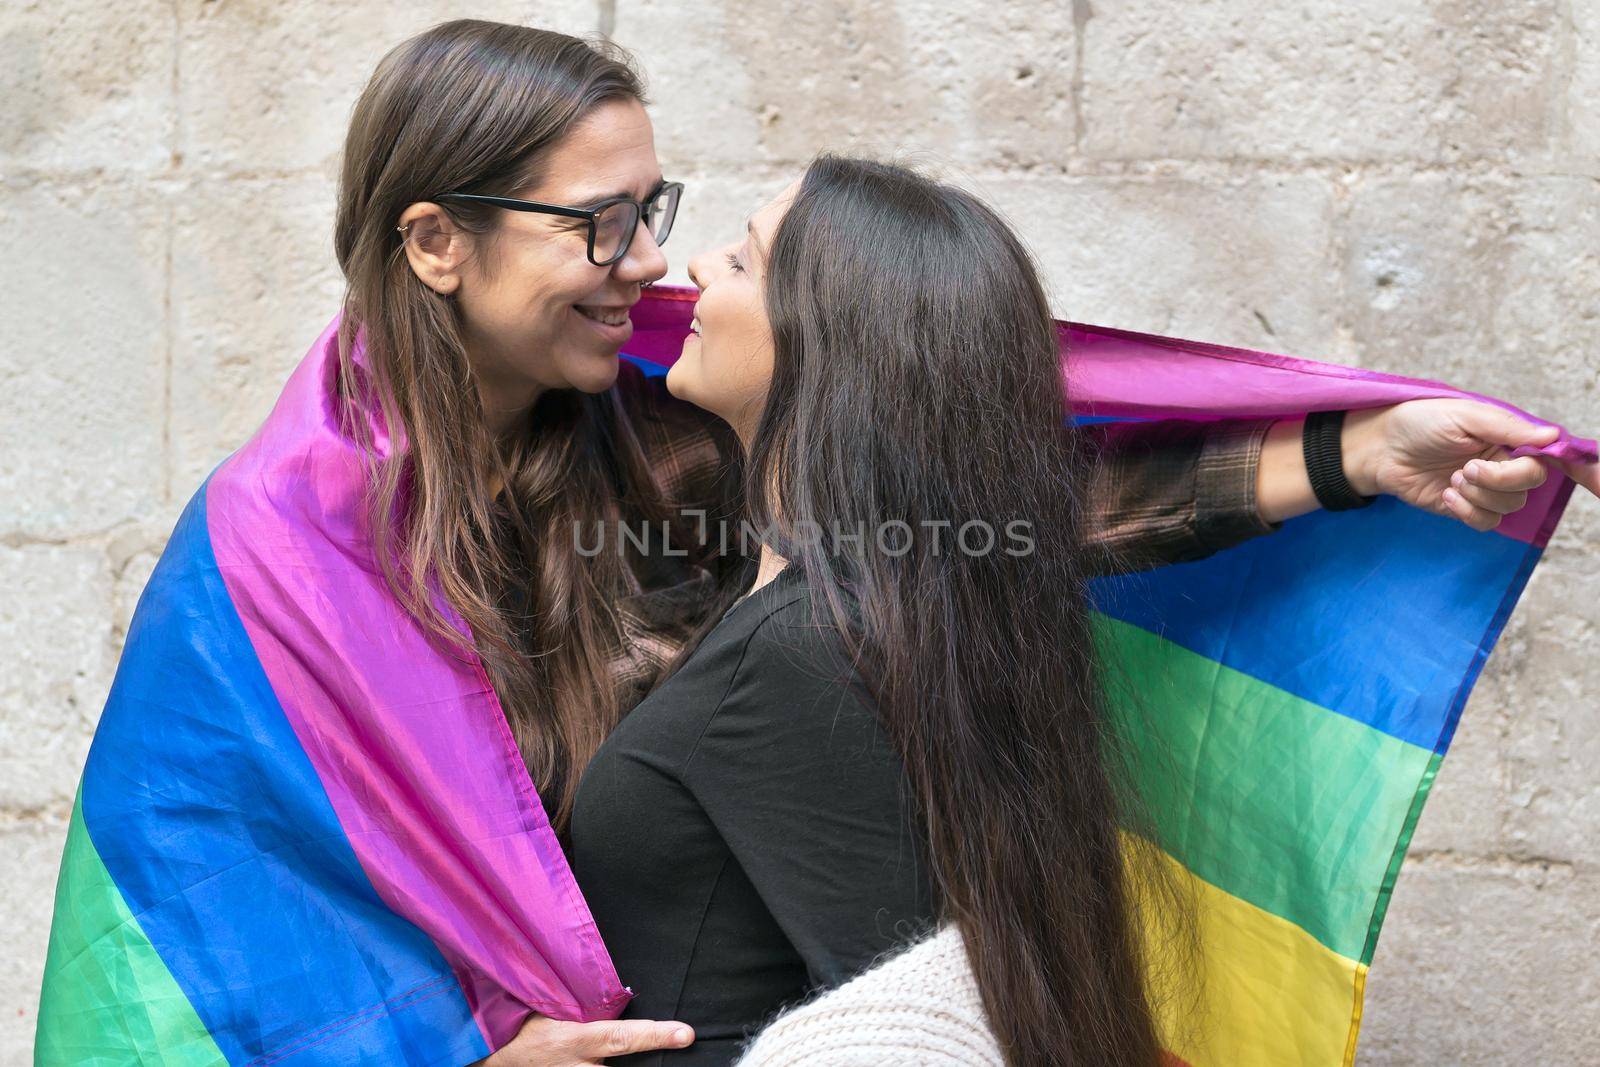 Portrait of an affectionate young lesbian couple hugging each other while standing together in front of a stone wall outside. High quality photo.